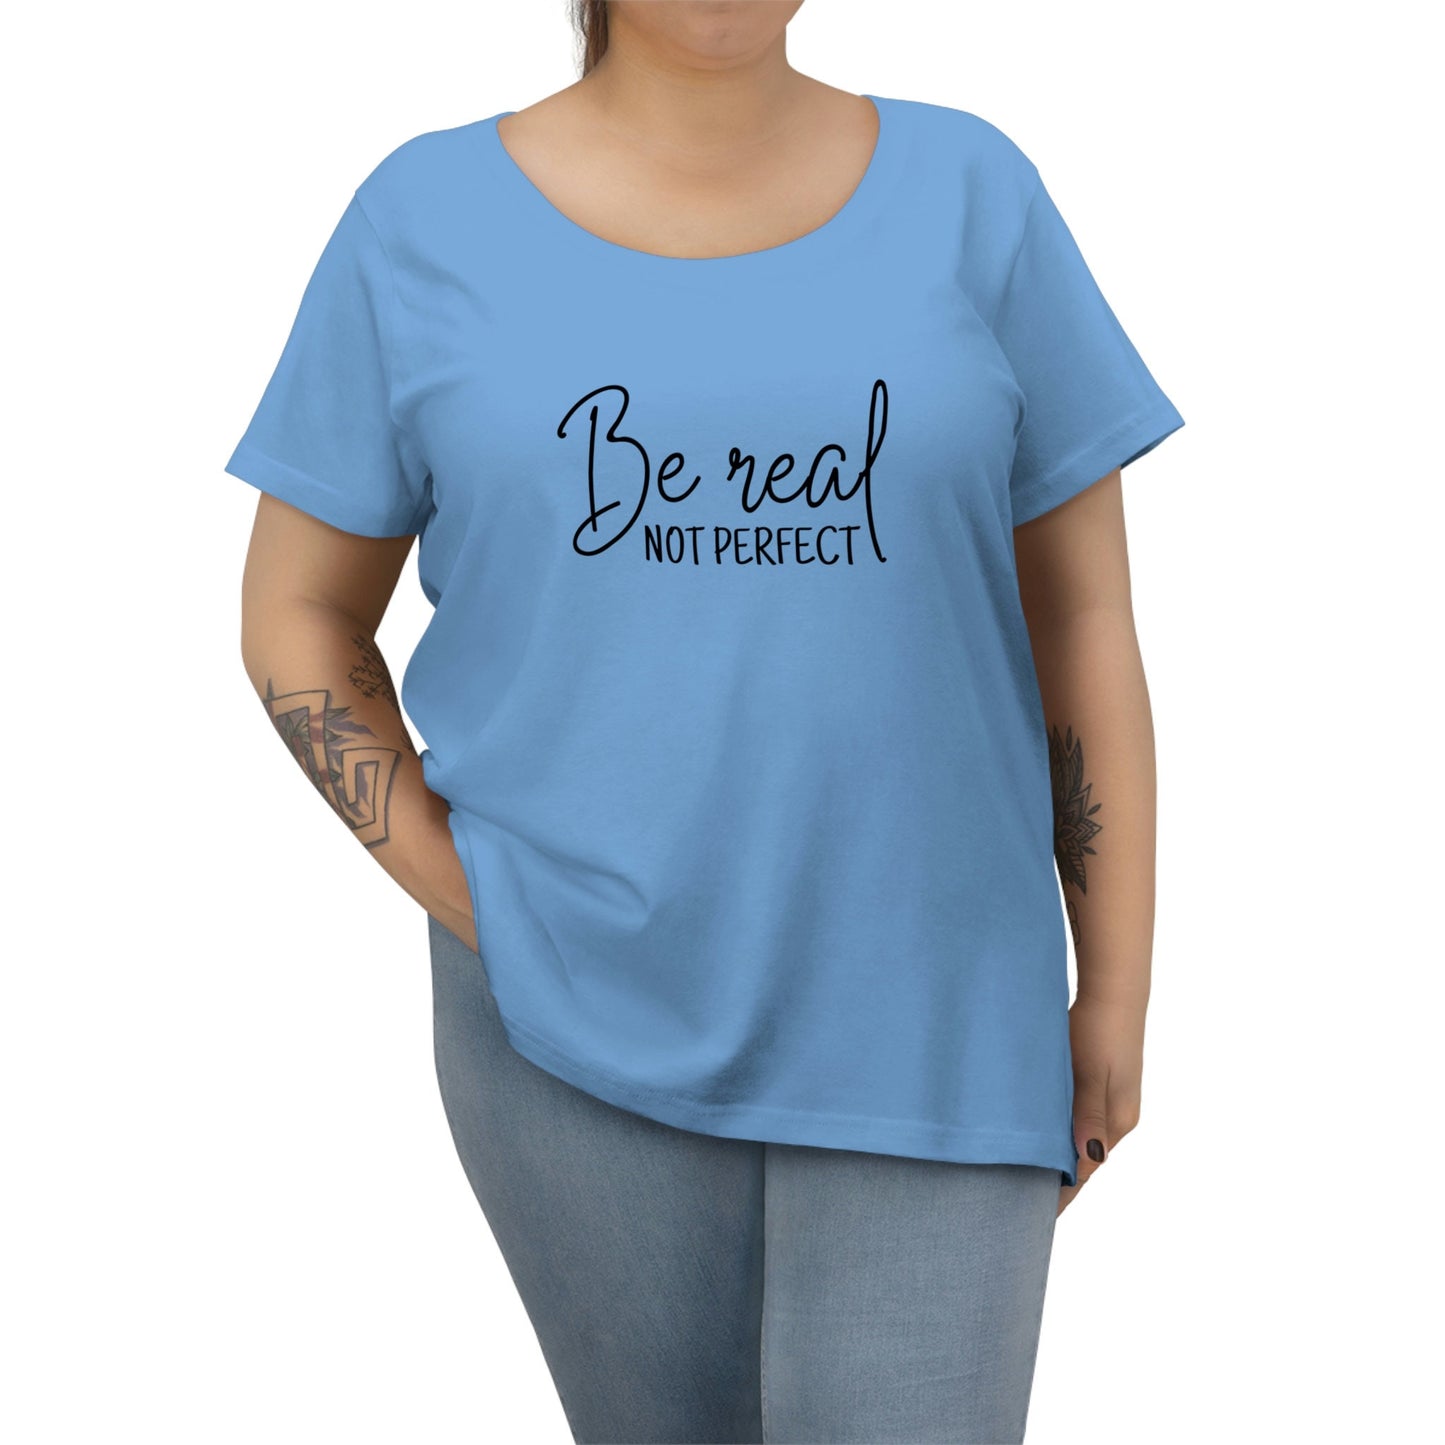 Be Real, Not Perfect - Women's Curvy Tee